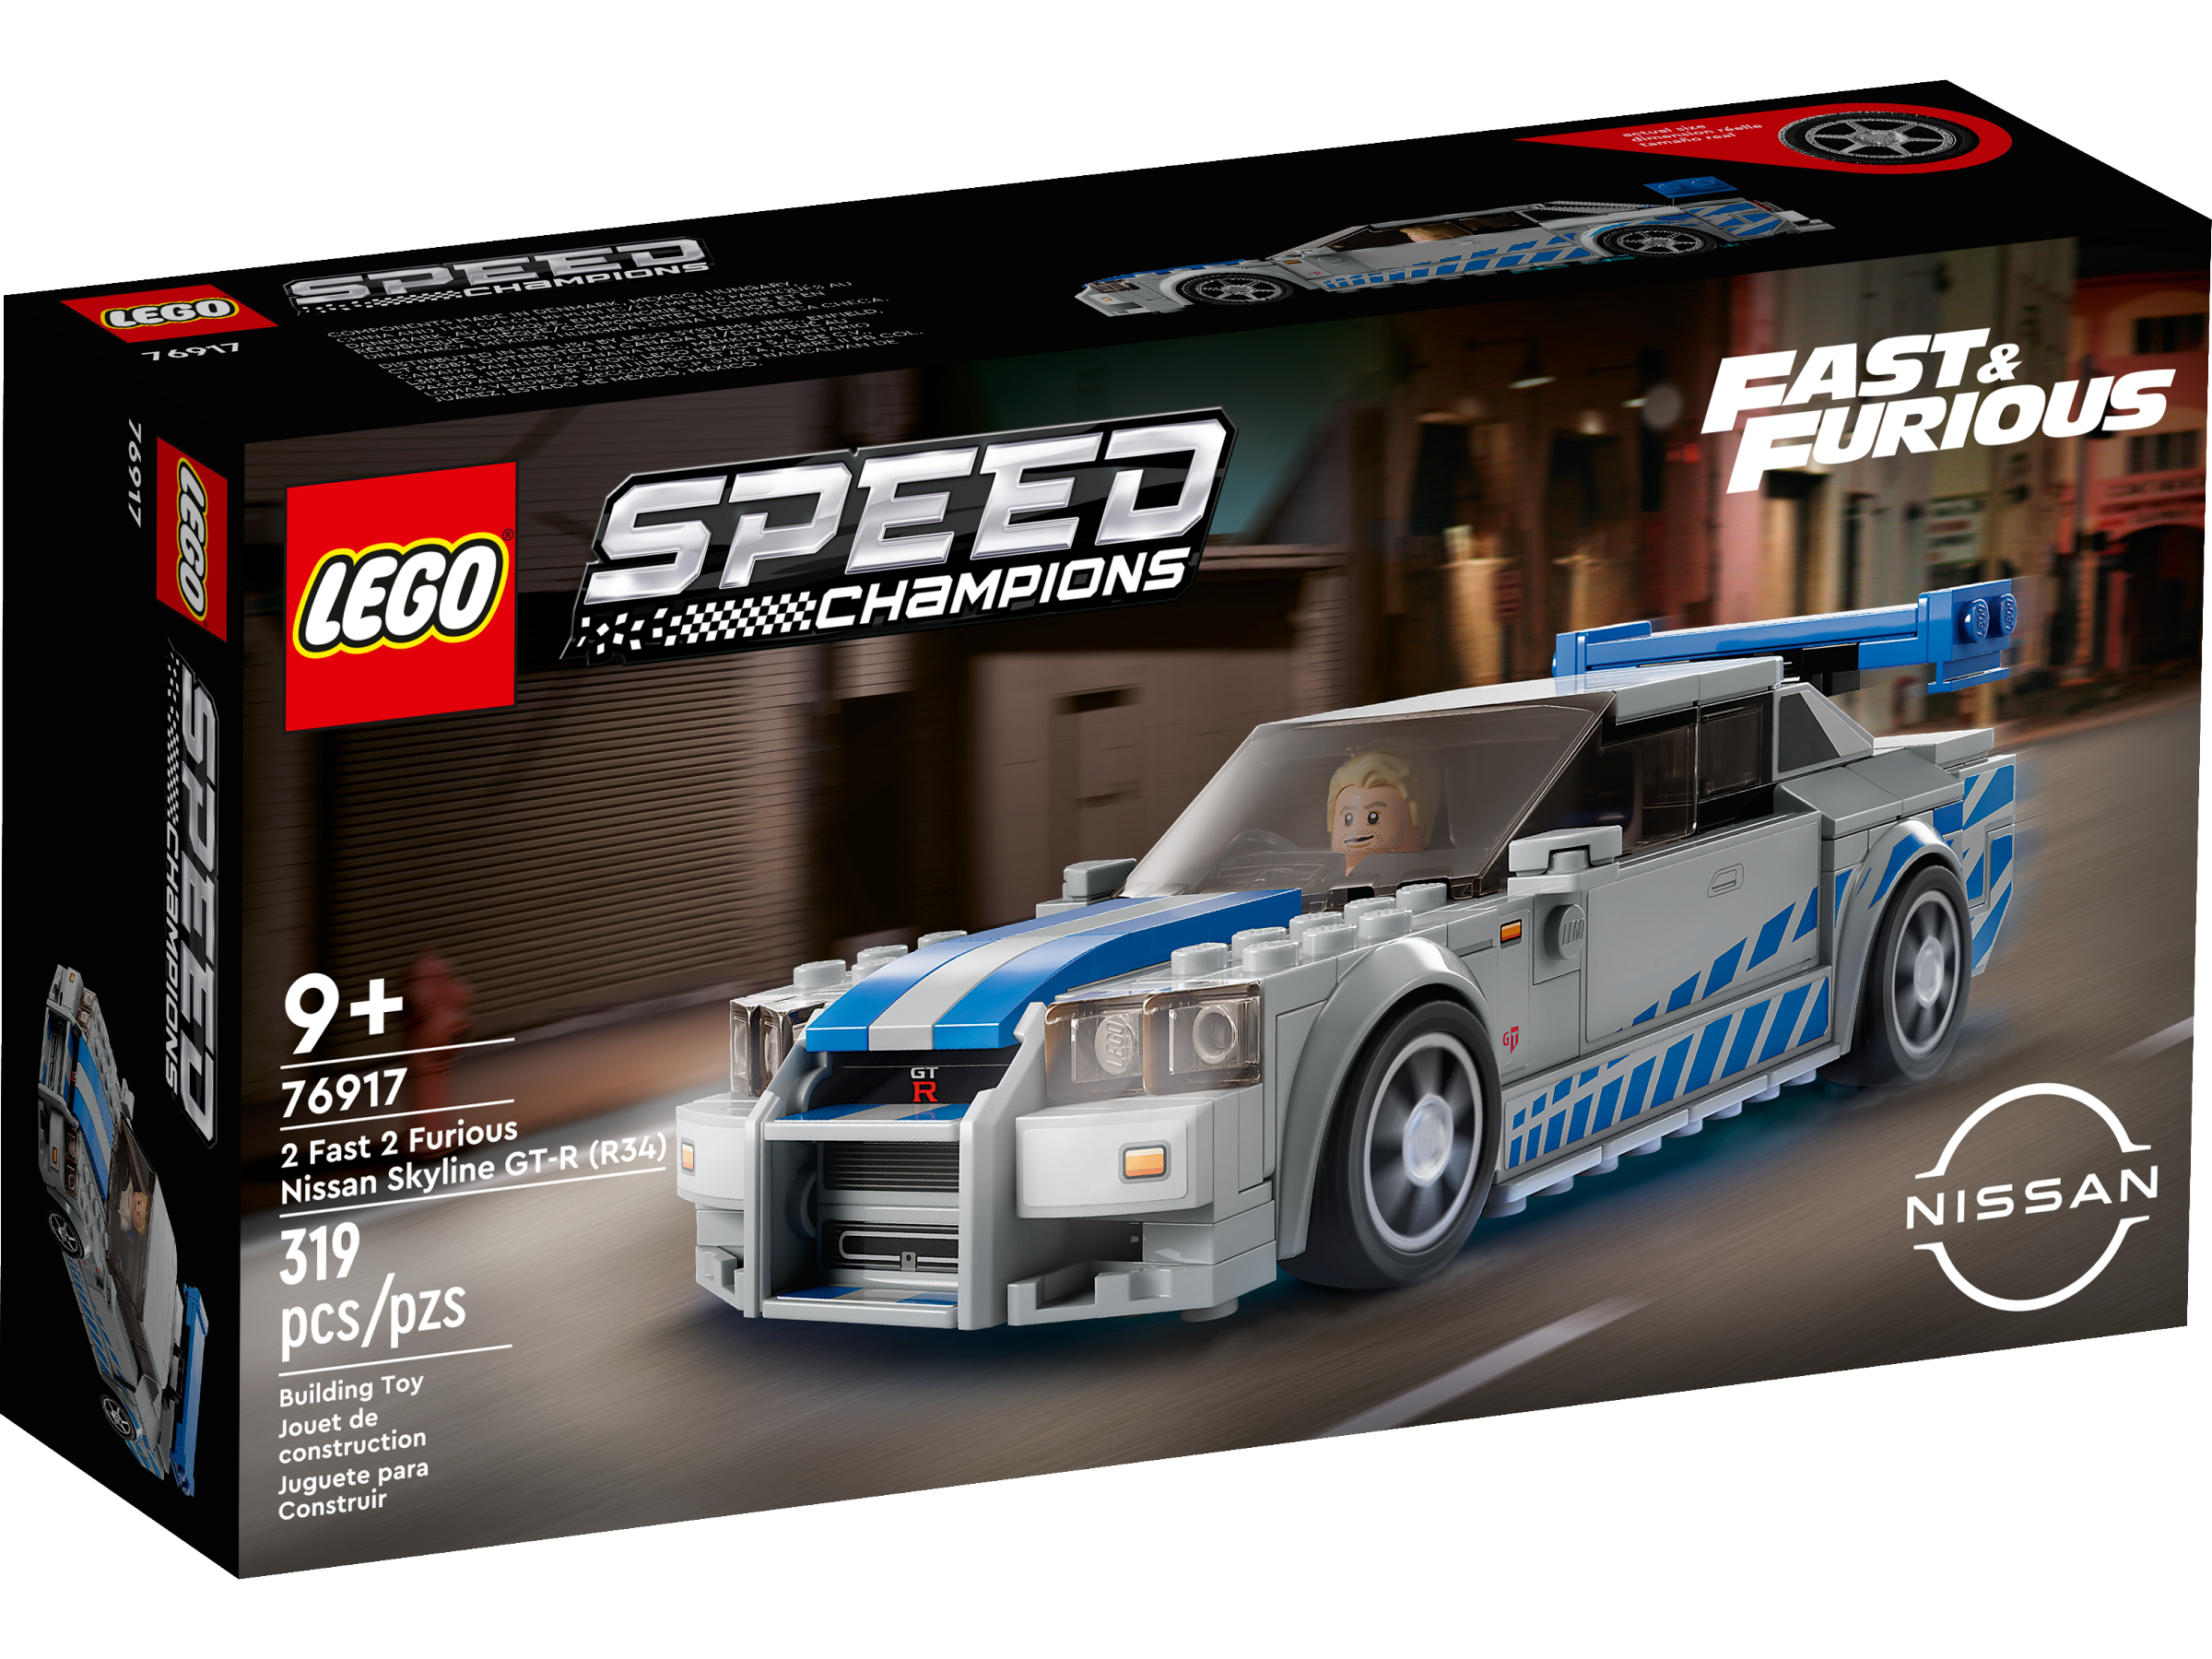 Nissan GT-R R34 Lego Set Coming—including a Brian O'Conner Minifig